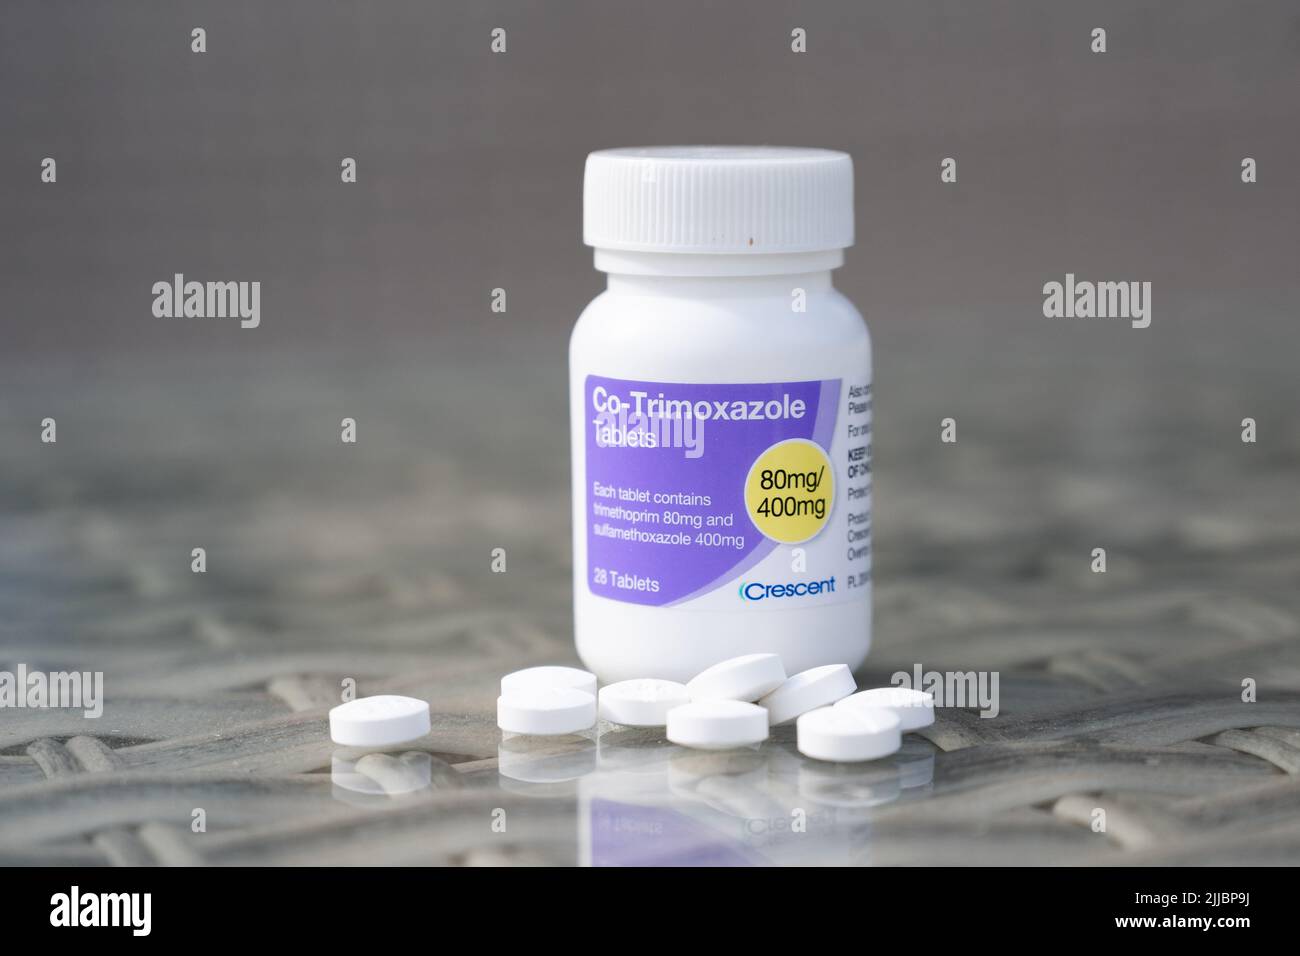 Co-Trimoxazole, an antibiotic used to treat certain bacterial infections Stock Photo